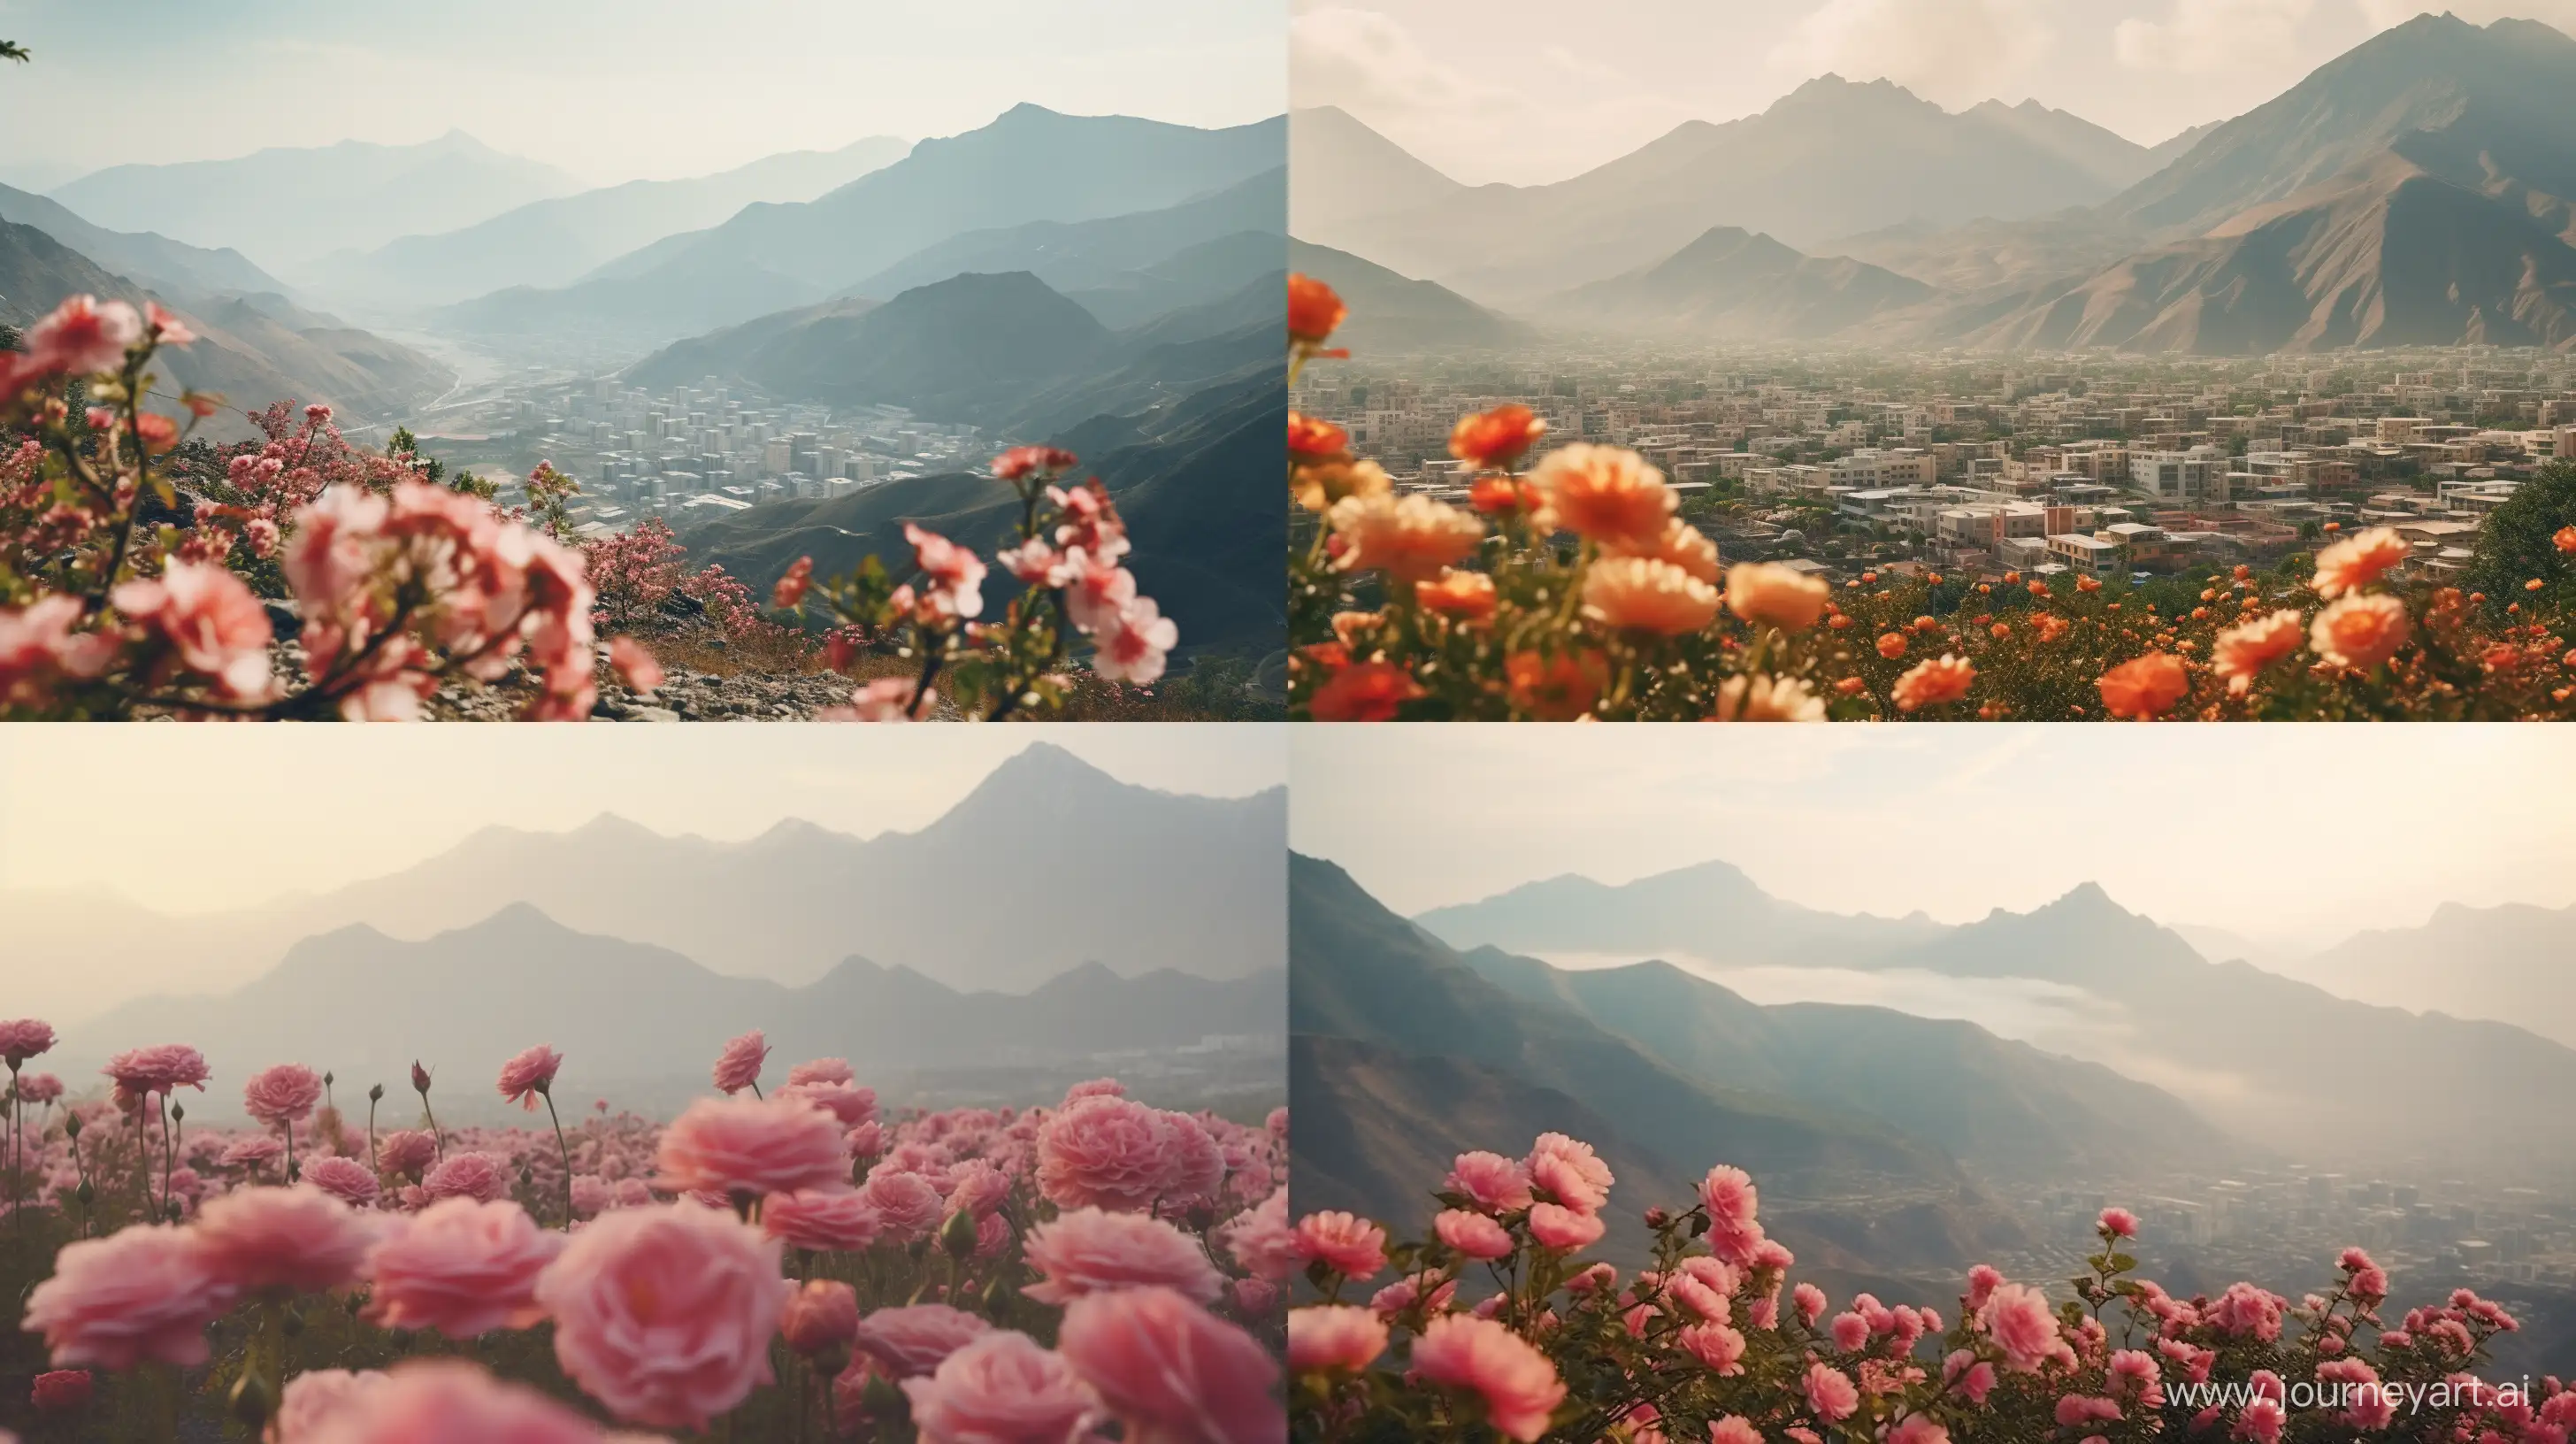 Majestic-Taif-Enchanting-Misty-Mountains-and-Taifi-Roses